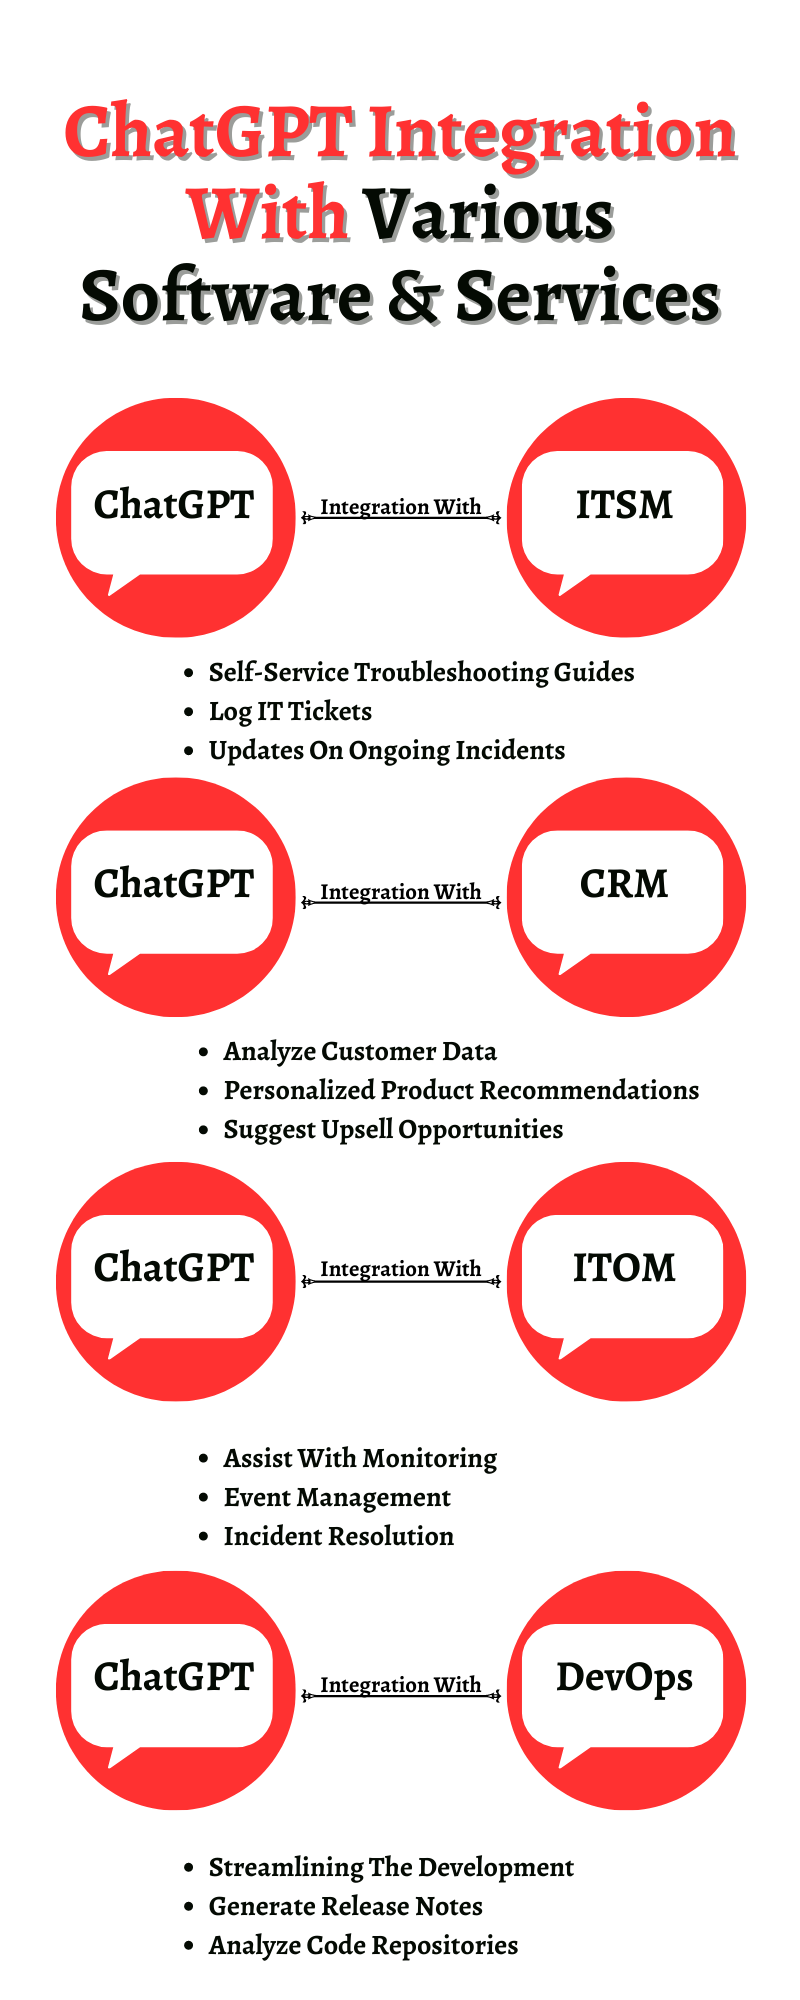 ChatGPT Integration With Various Software & Services